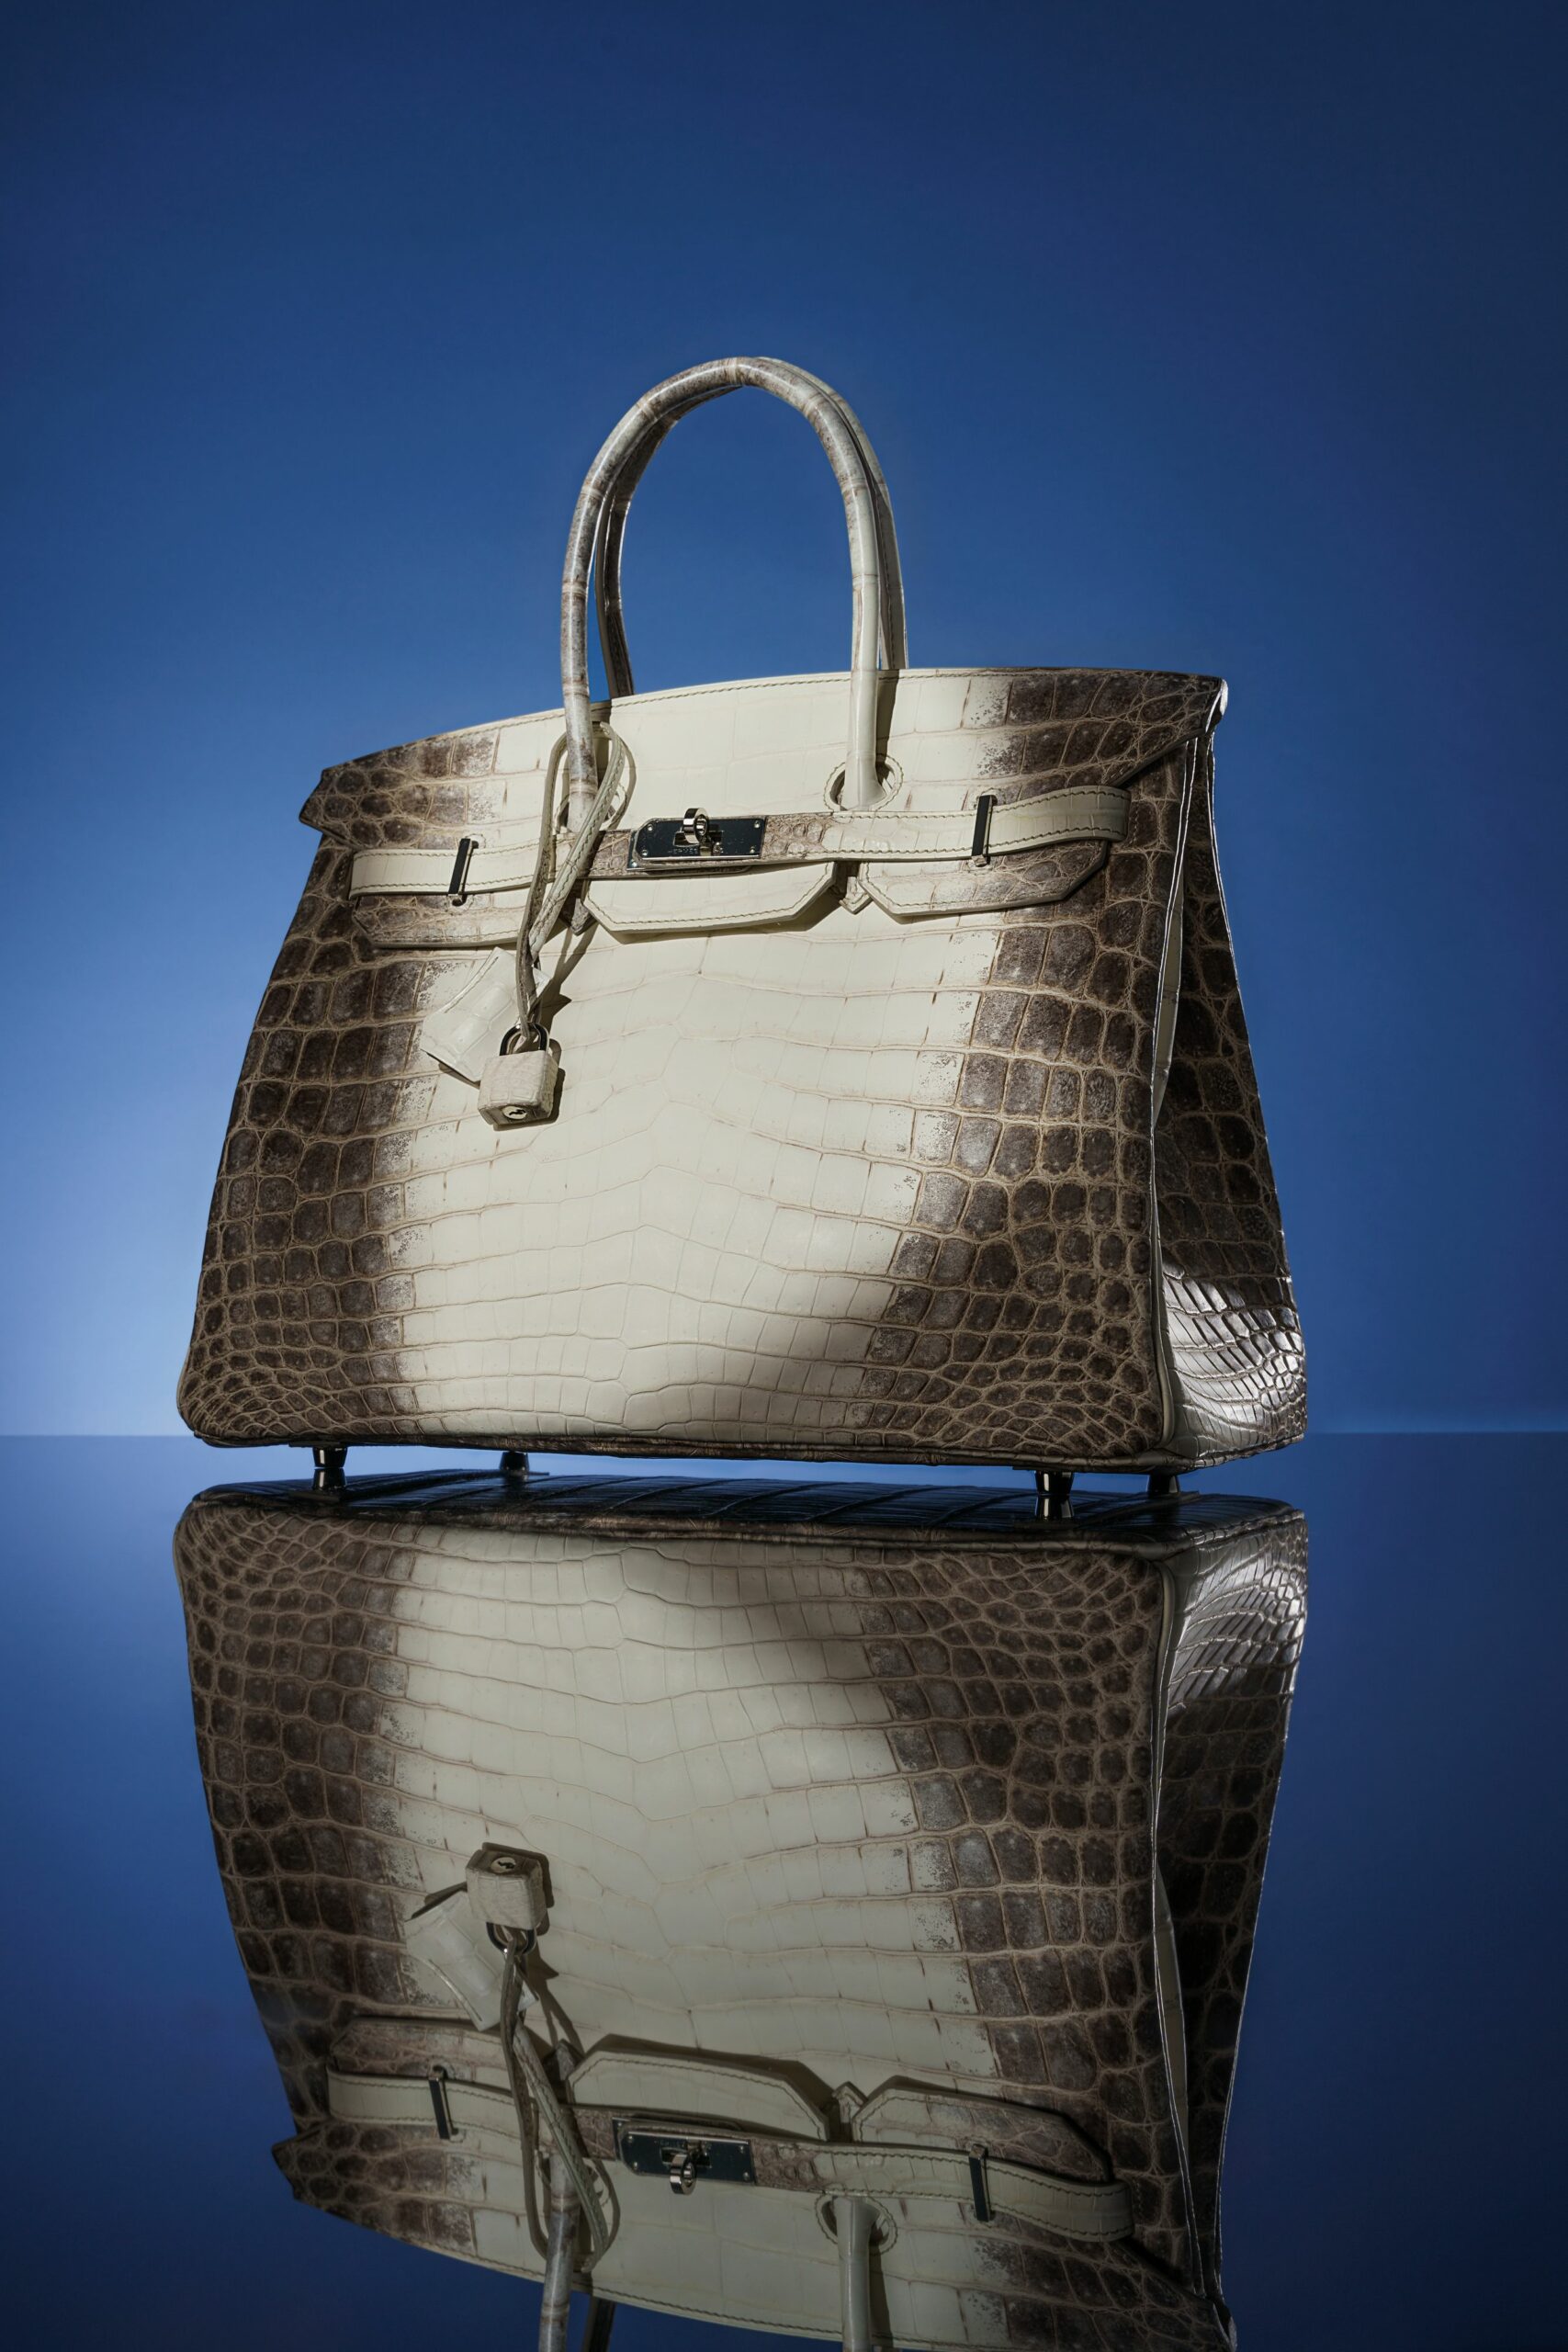 Rare Hermès handbags come up for auction in Amsterdam 